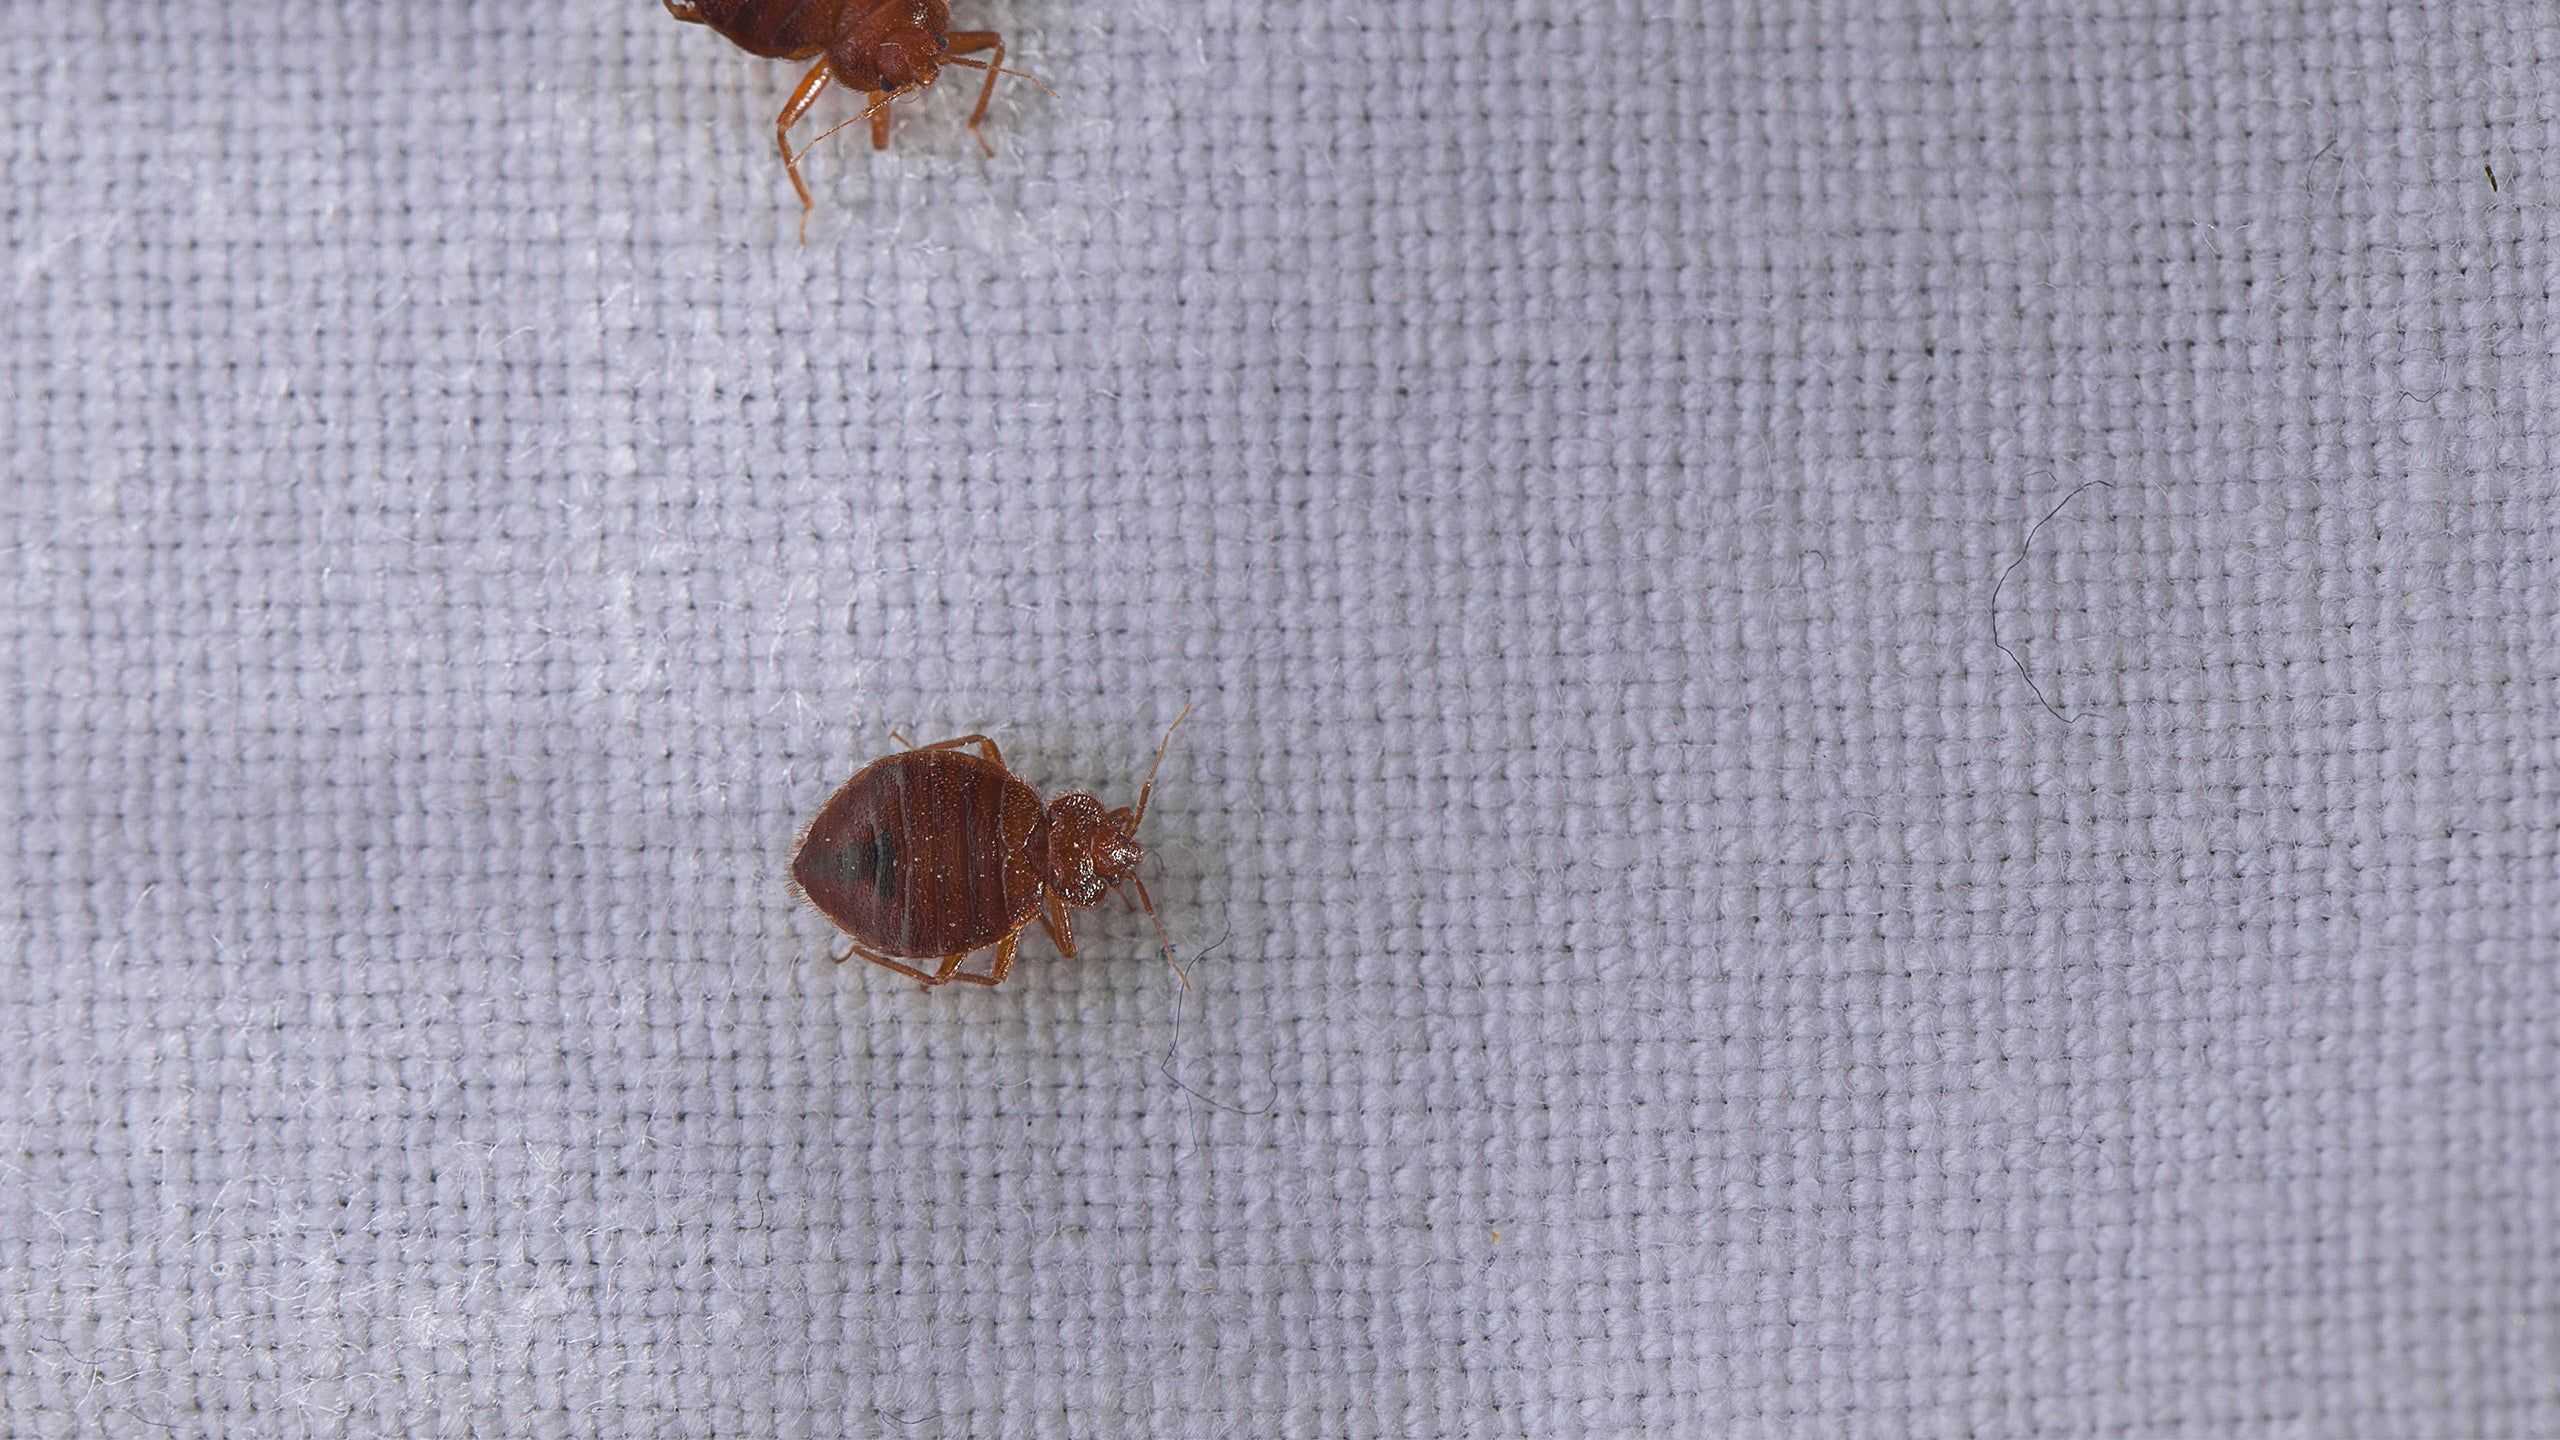 bed bug on a woven blanket